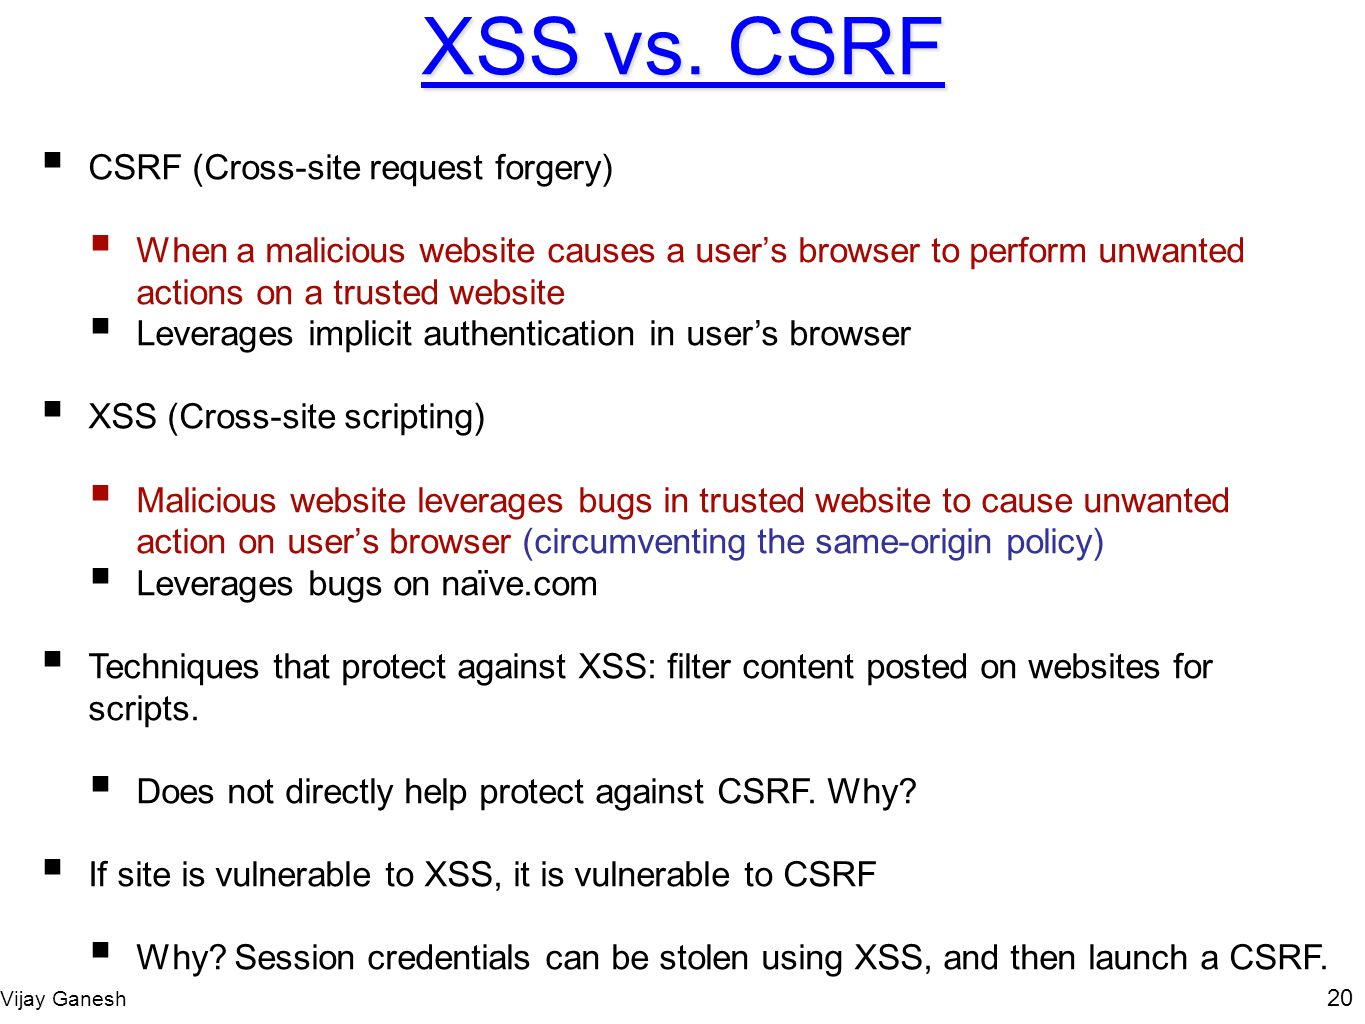 CSRF vs. XSS: What are Their Similarity and Differences – Gridinsoft Blogs